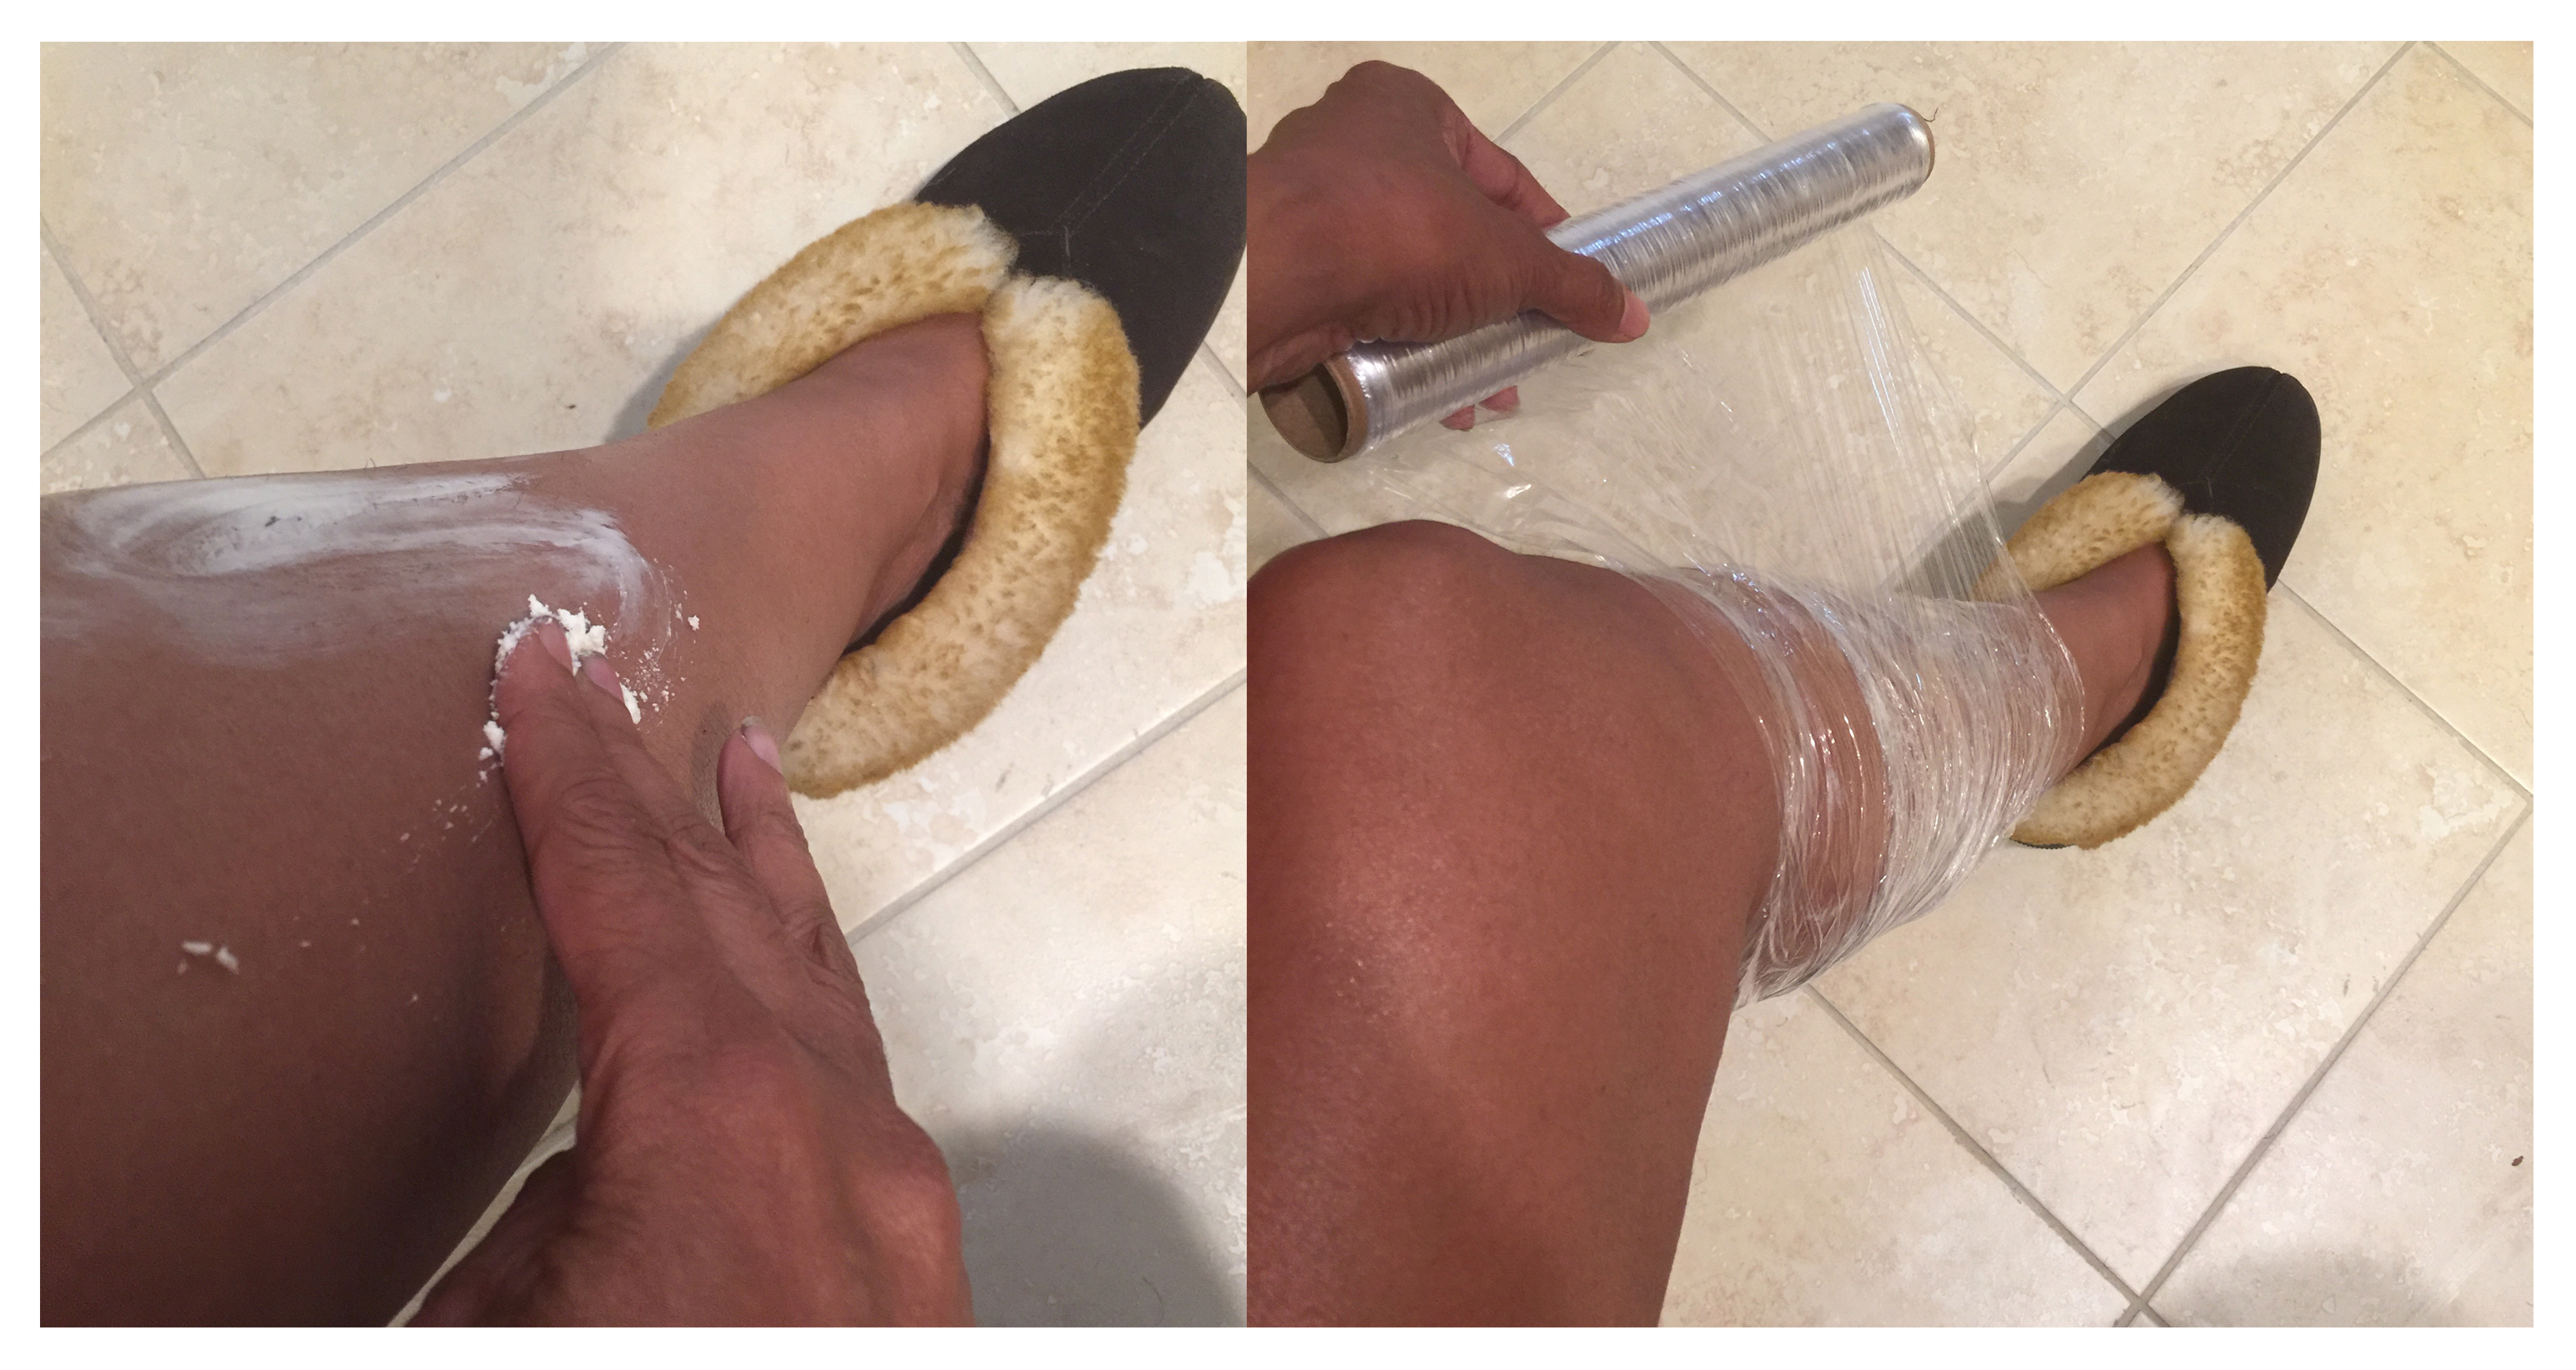 Apply shea butter and wrap your legs overnight in plastic wrap to treat extremely dry skin